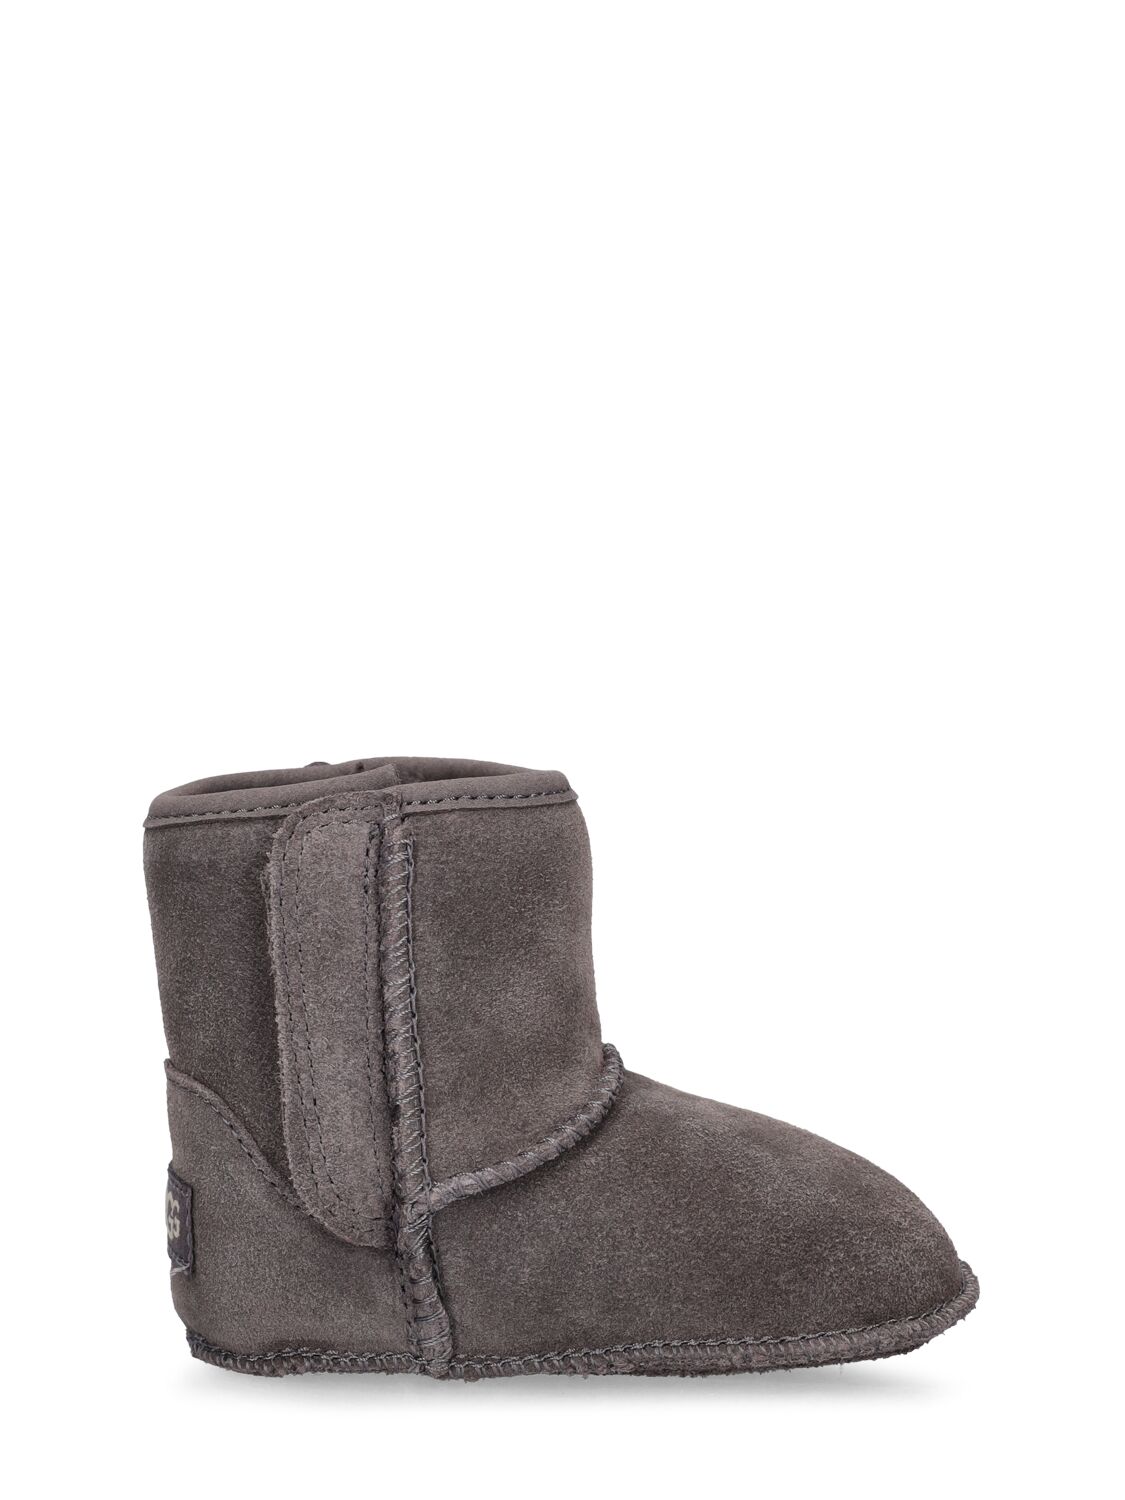 Image of Baby Classic Shearling Boots